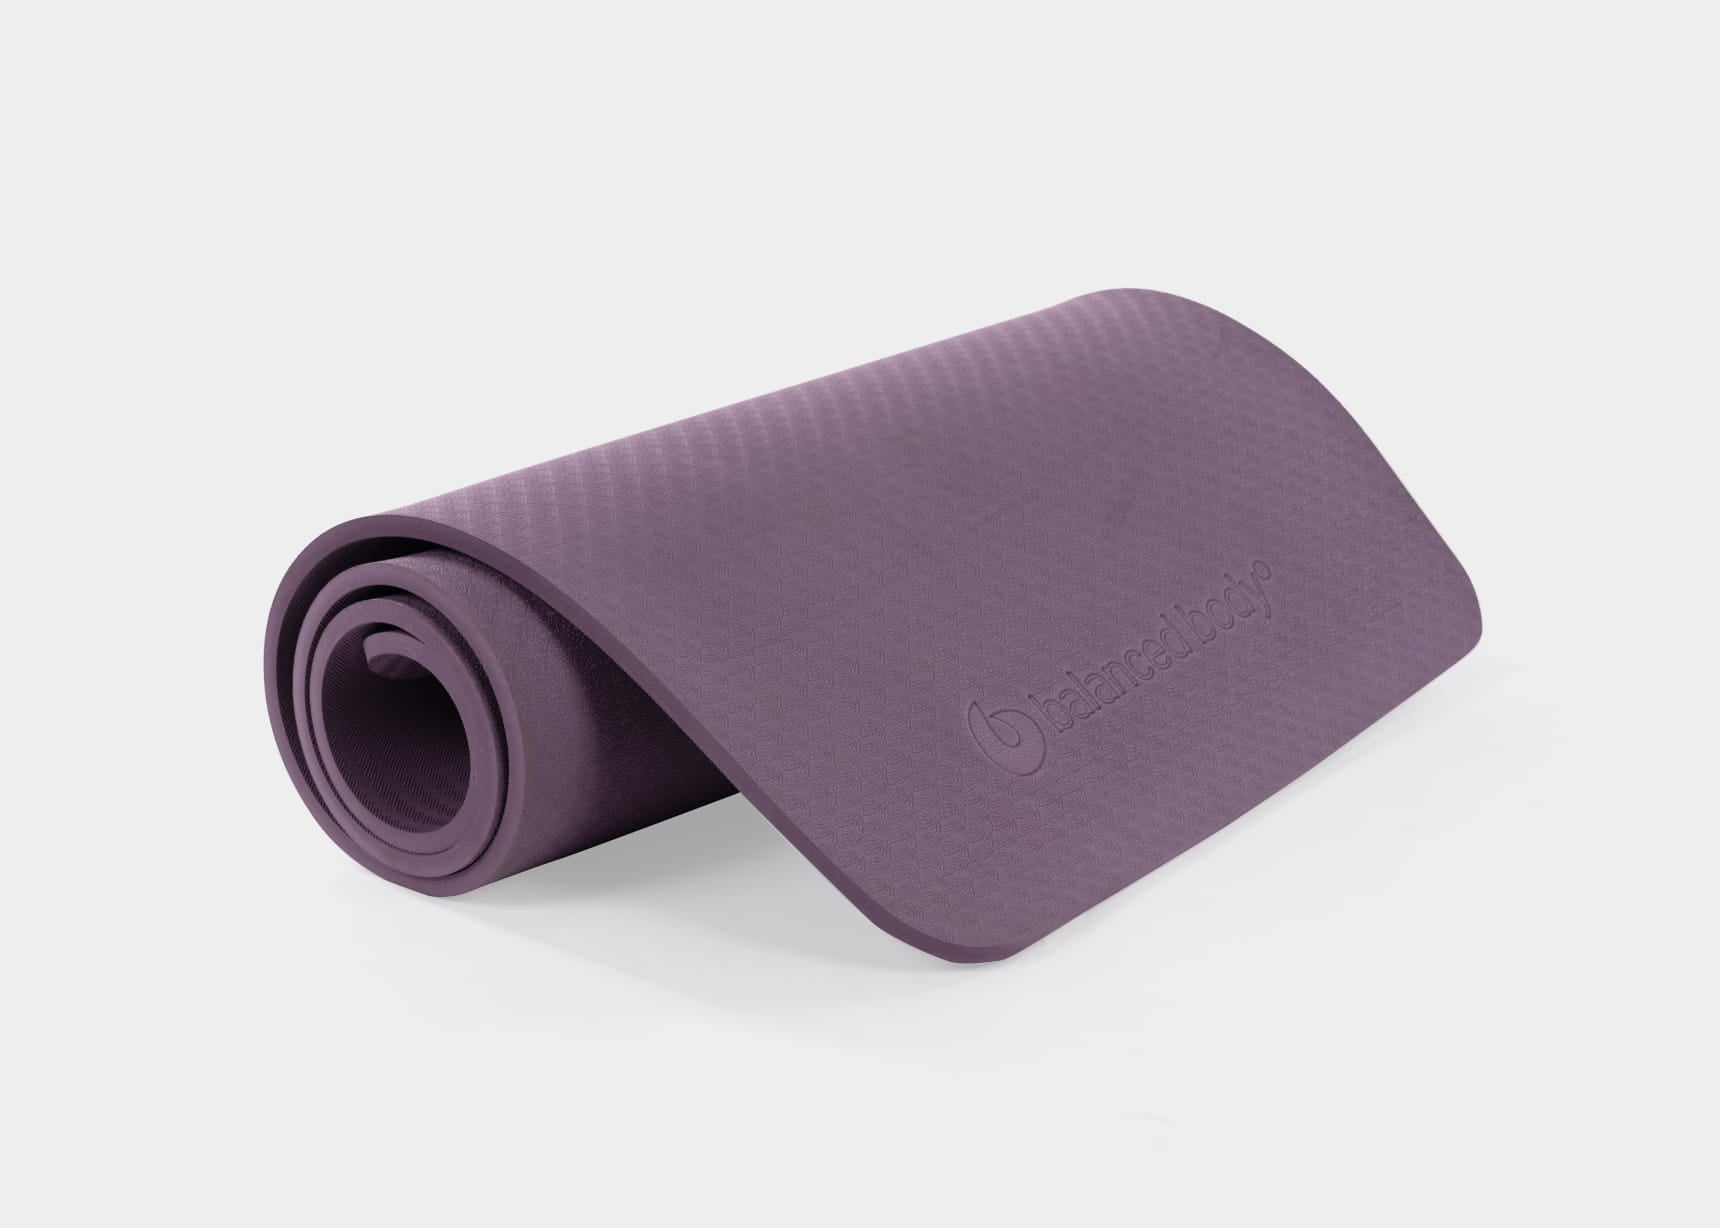 PILATES MAT Greeting Card for Sale by WArtdesign